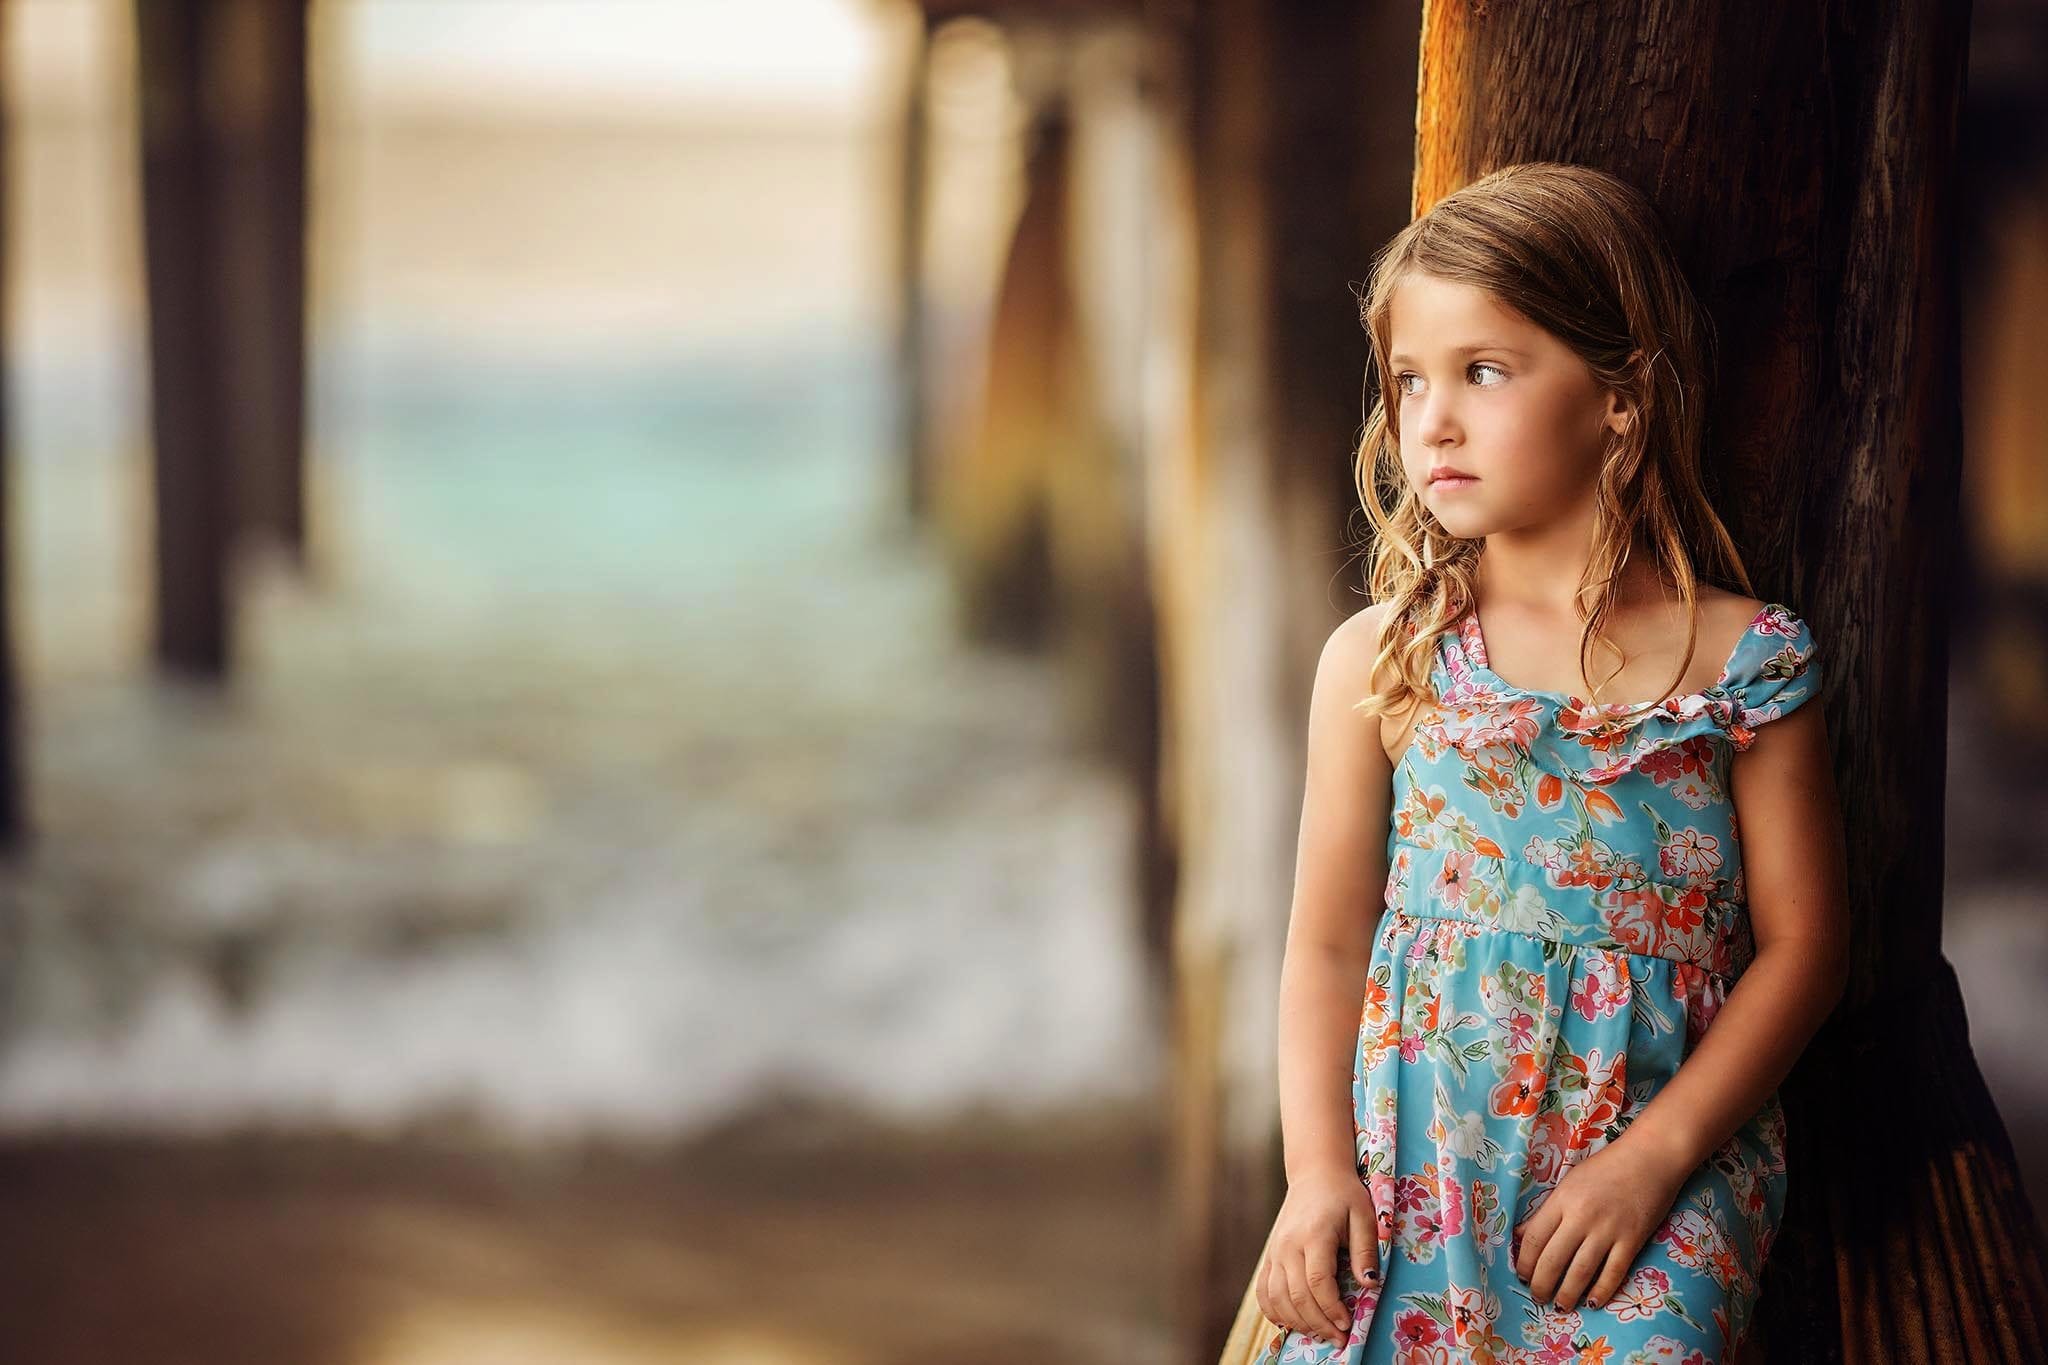  Ways To Use The Levels Adjustment Layer In Photoshop to make your photo dark and moody